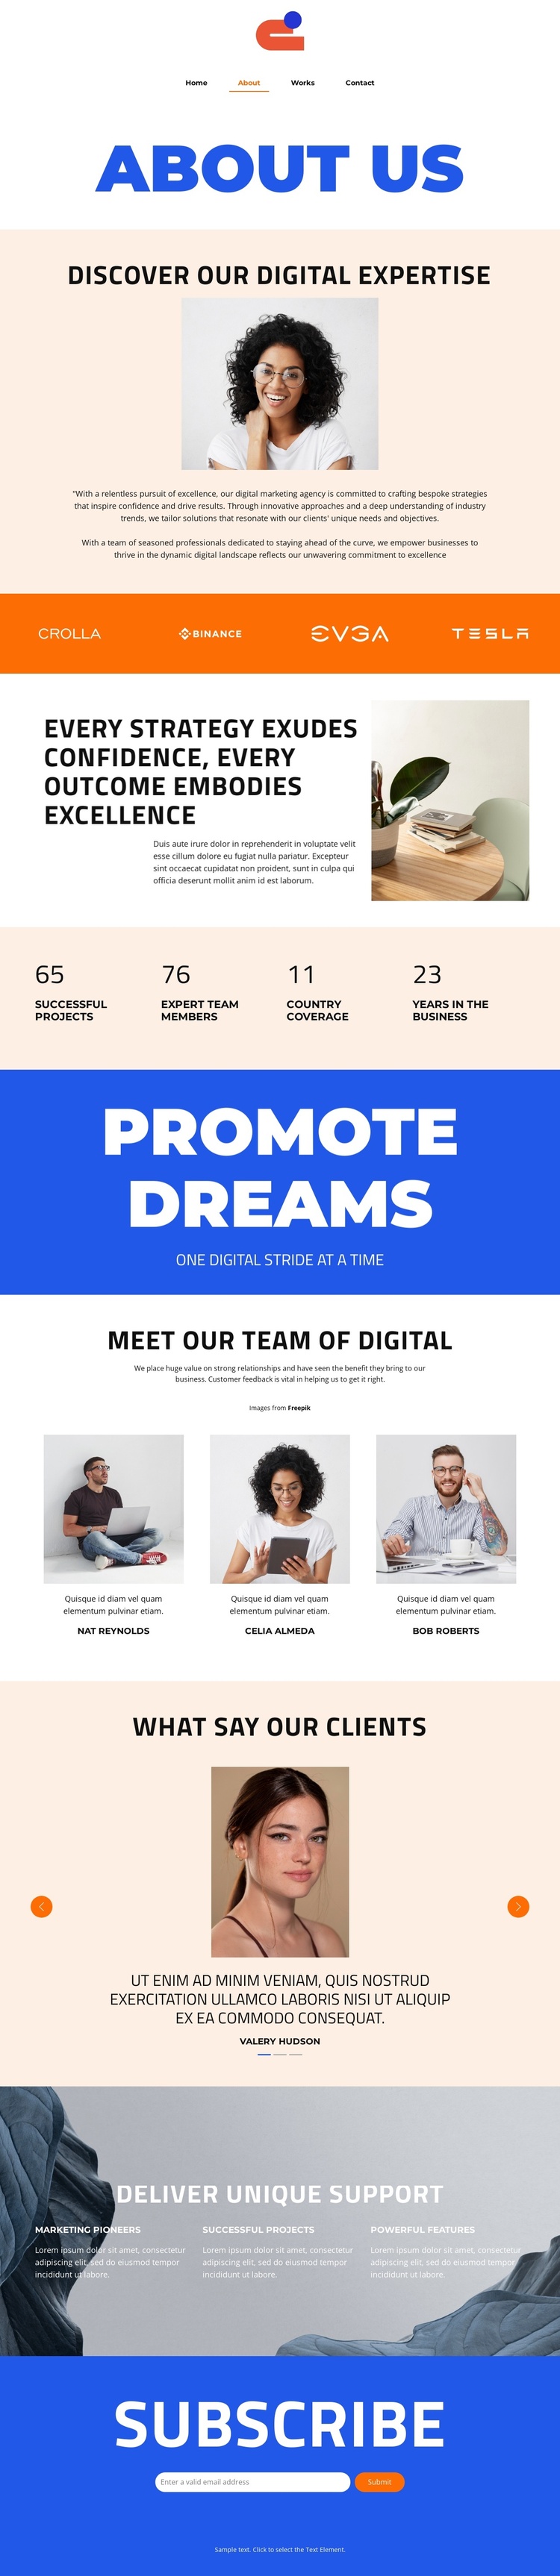 One digital stride at a time Joomla Template